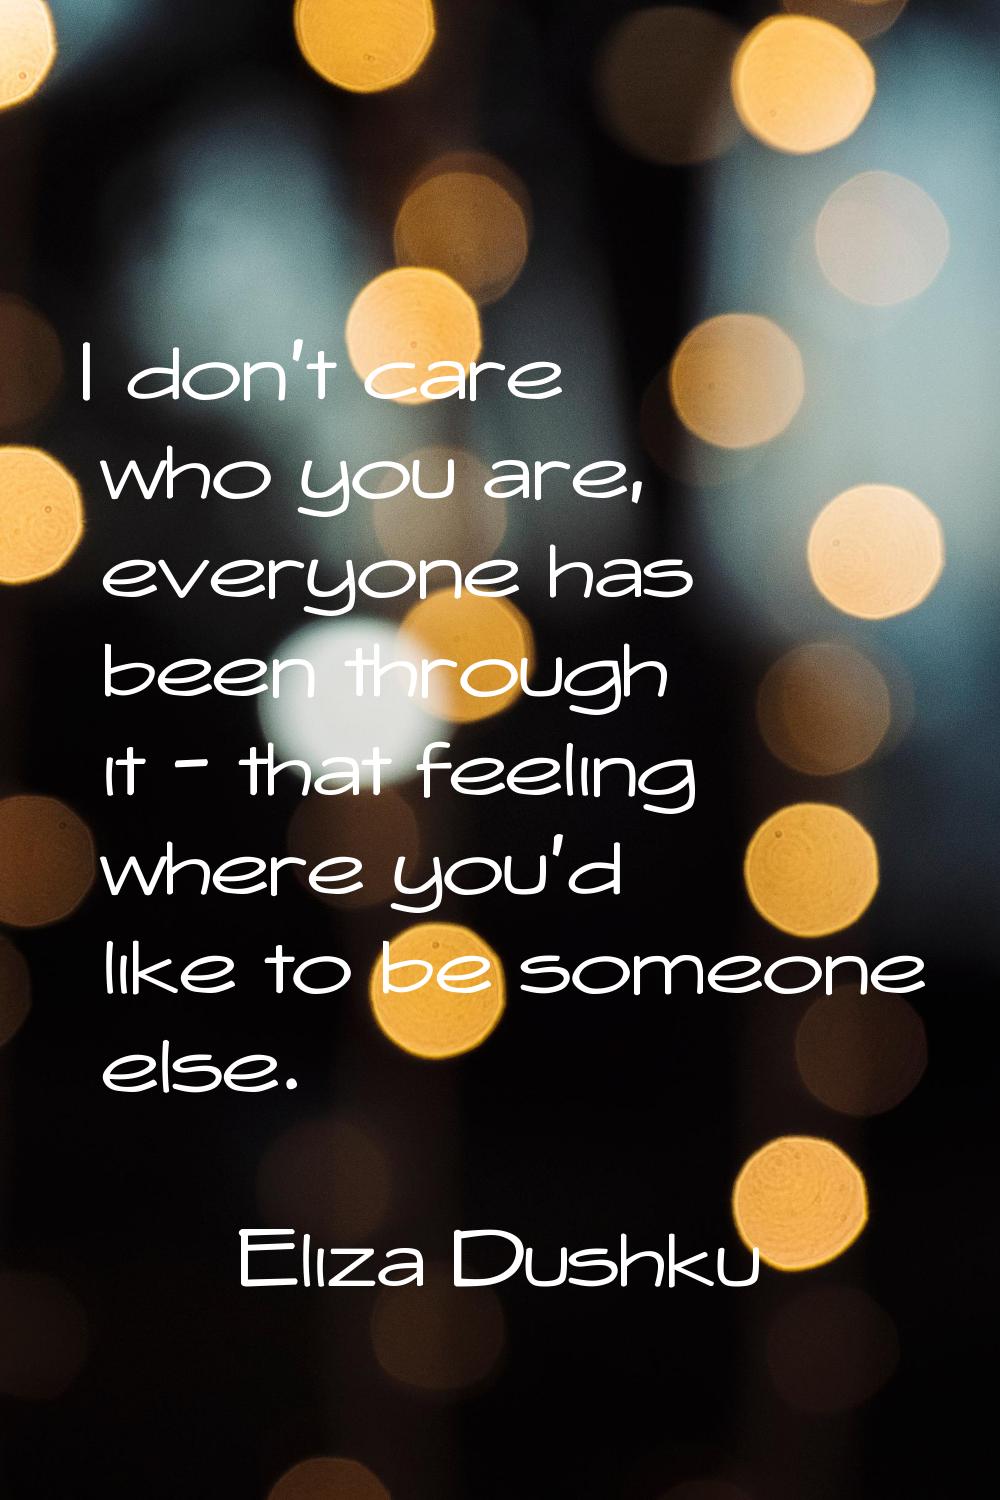 I don't care who you are, everyone has been through it - that feeling where you'd like to be someon